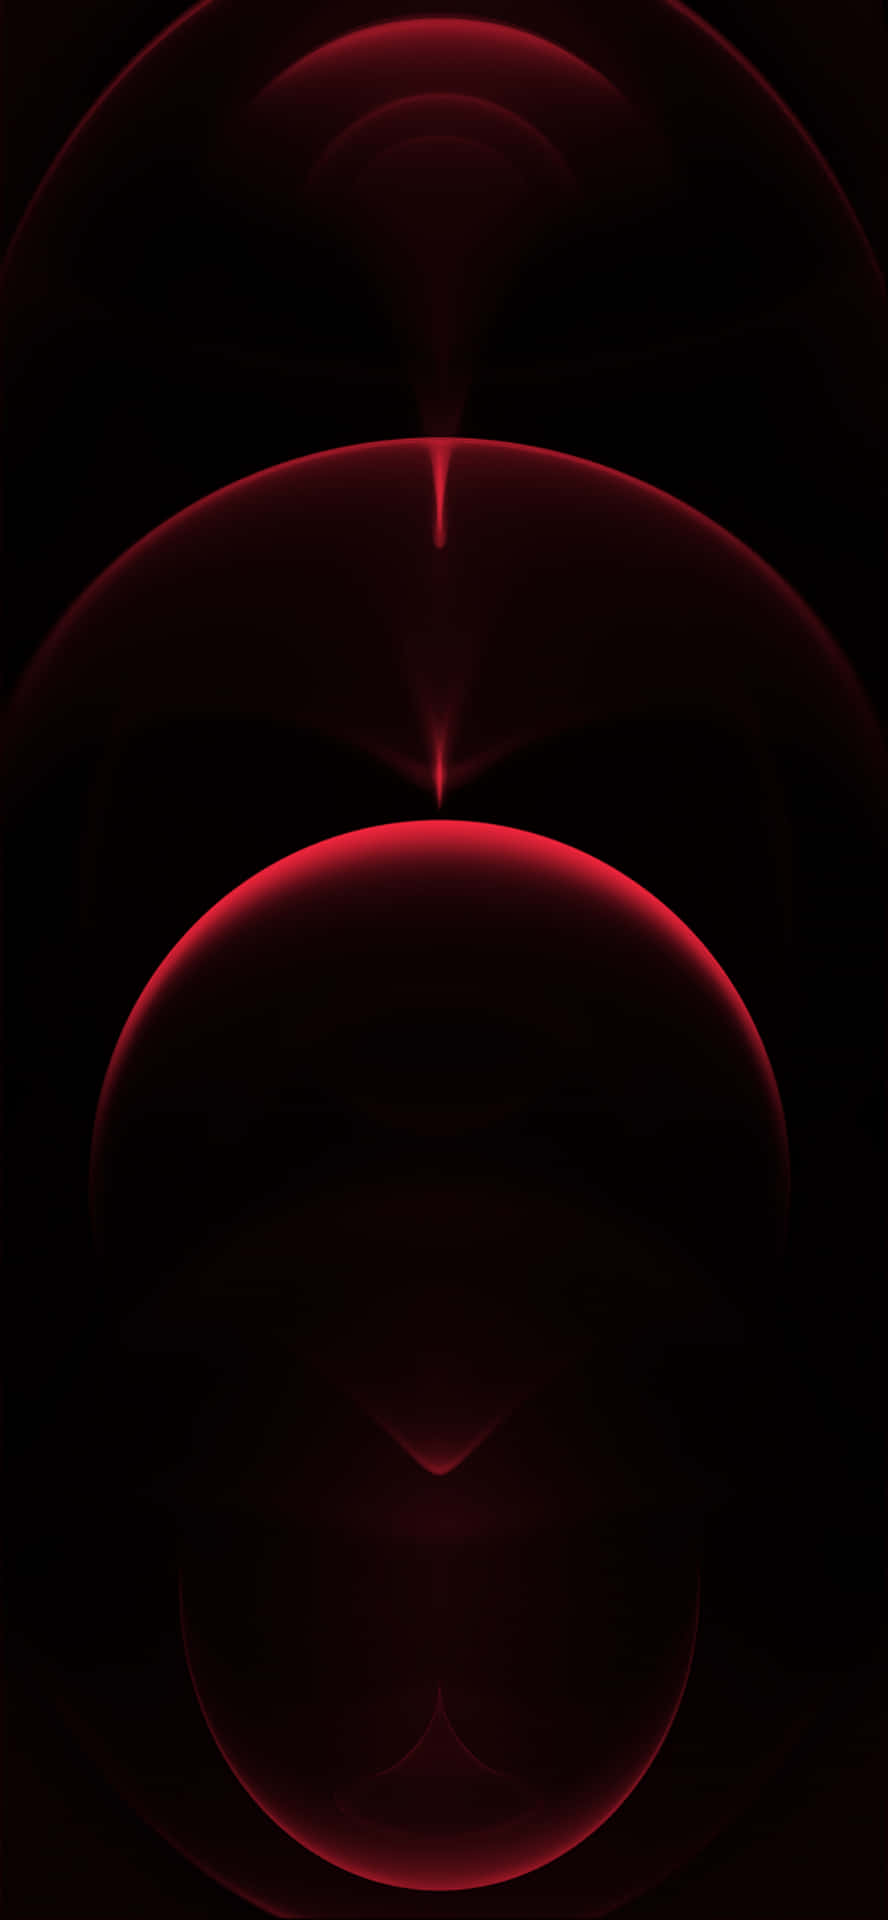 A fiery Red iPhone X full of creative potential Wallpaper